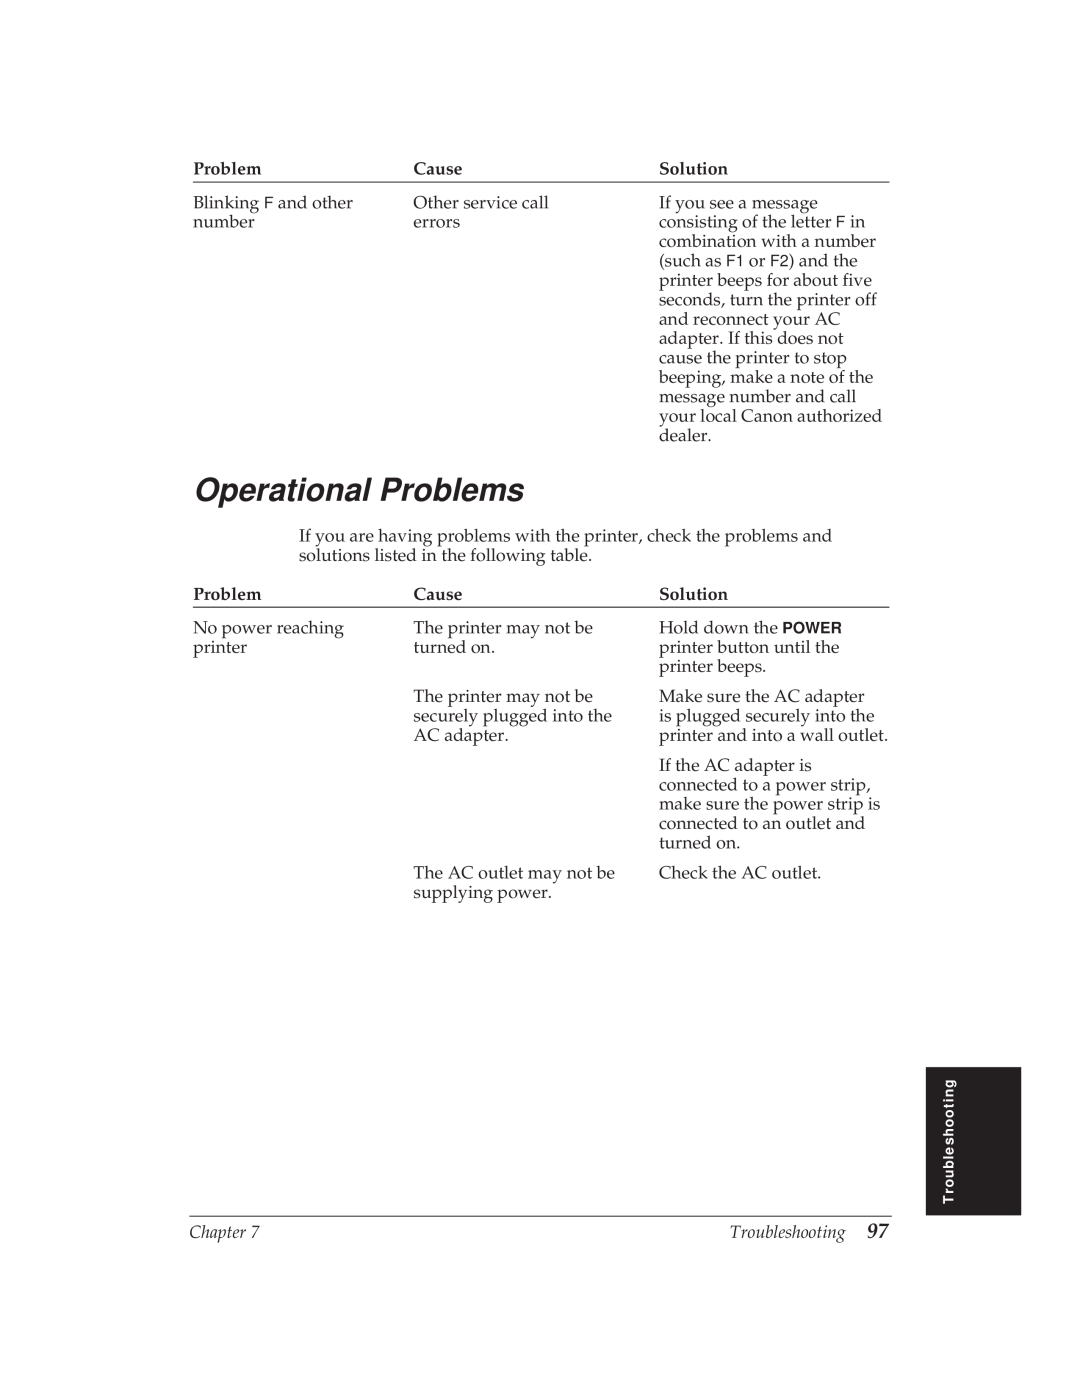 Canon BJ-30 manual Operational Problems, Cause, Solution 